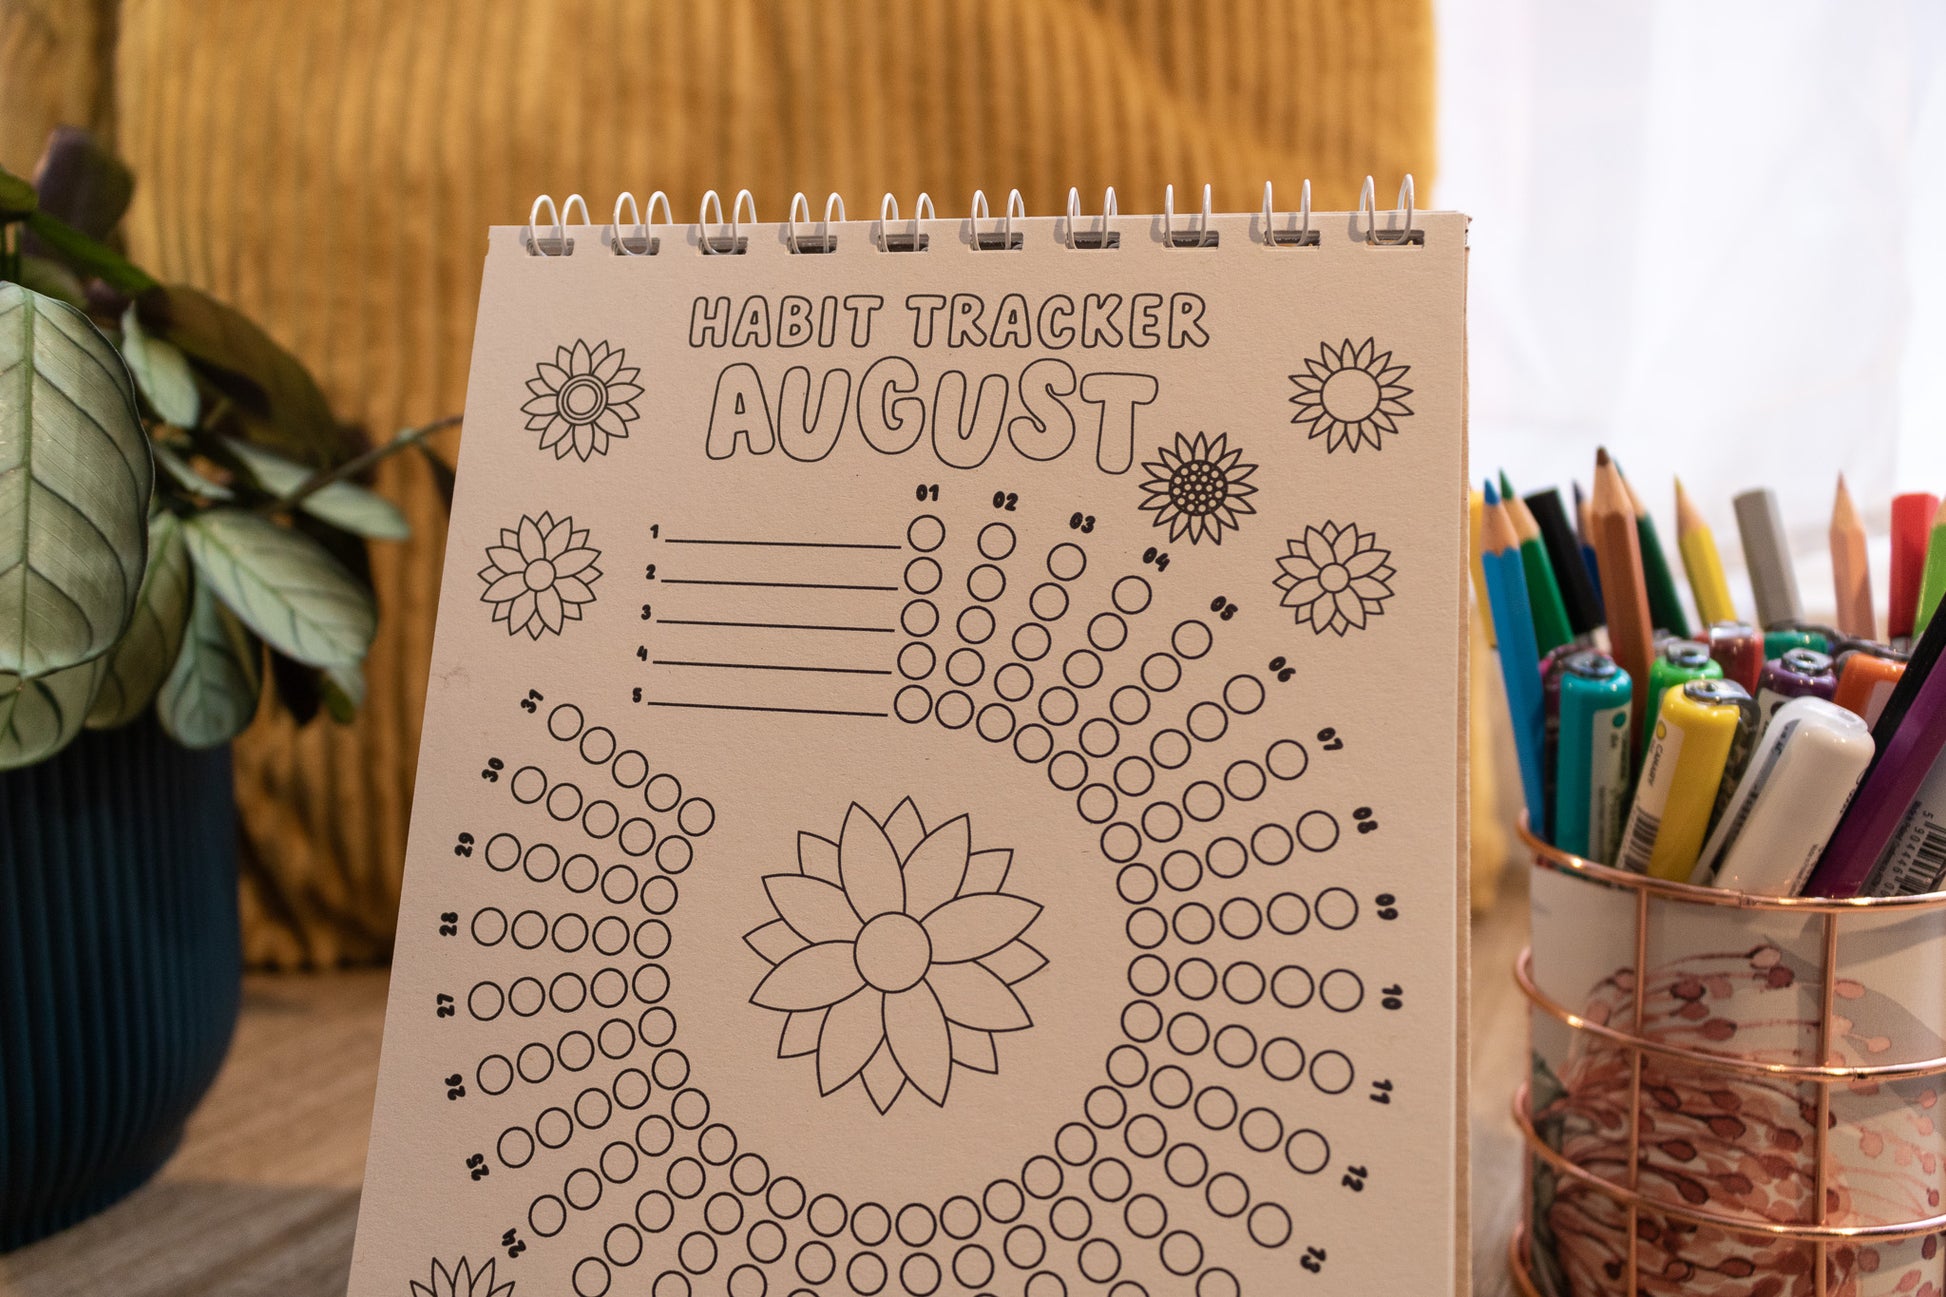 12-month Colouring Habit Tracker by MellowApricotStudio - A5 & A6 standing desk calendar - august page with sunflowers